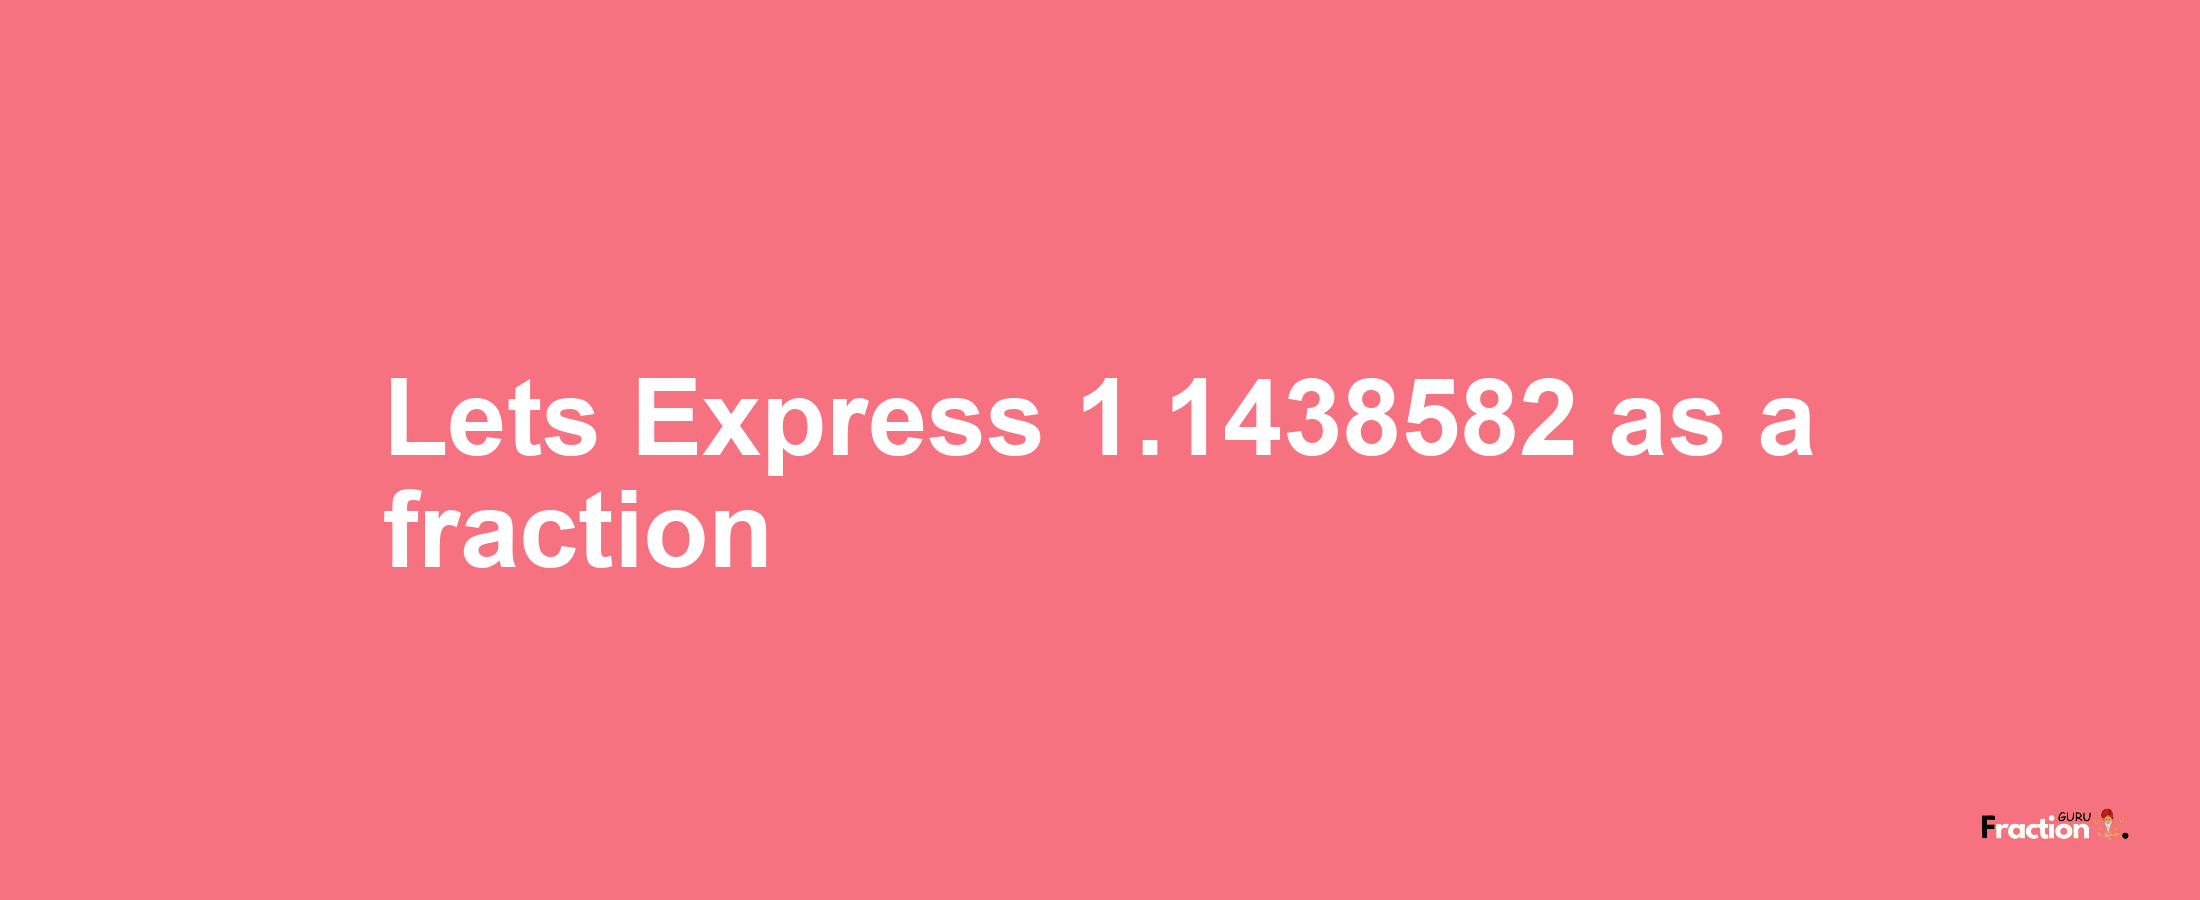 Lets Express 1.1438582 as afraction